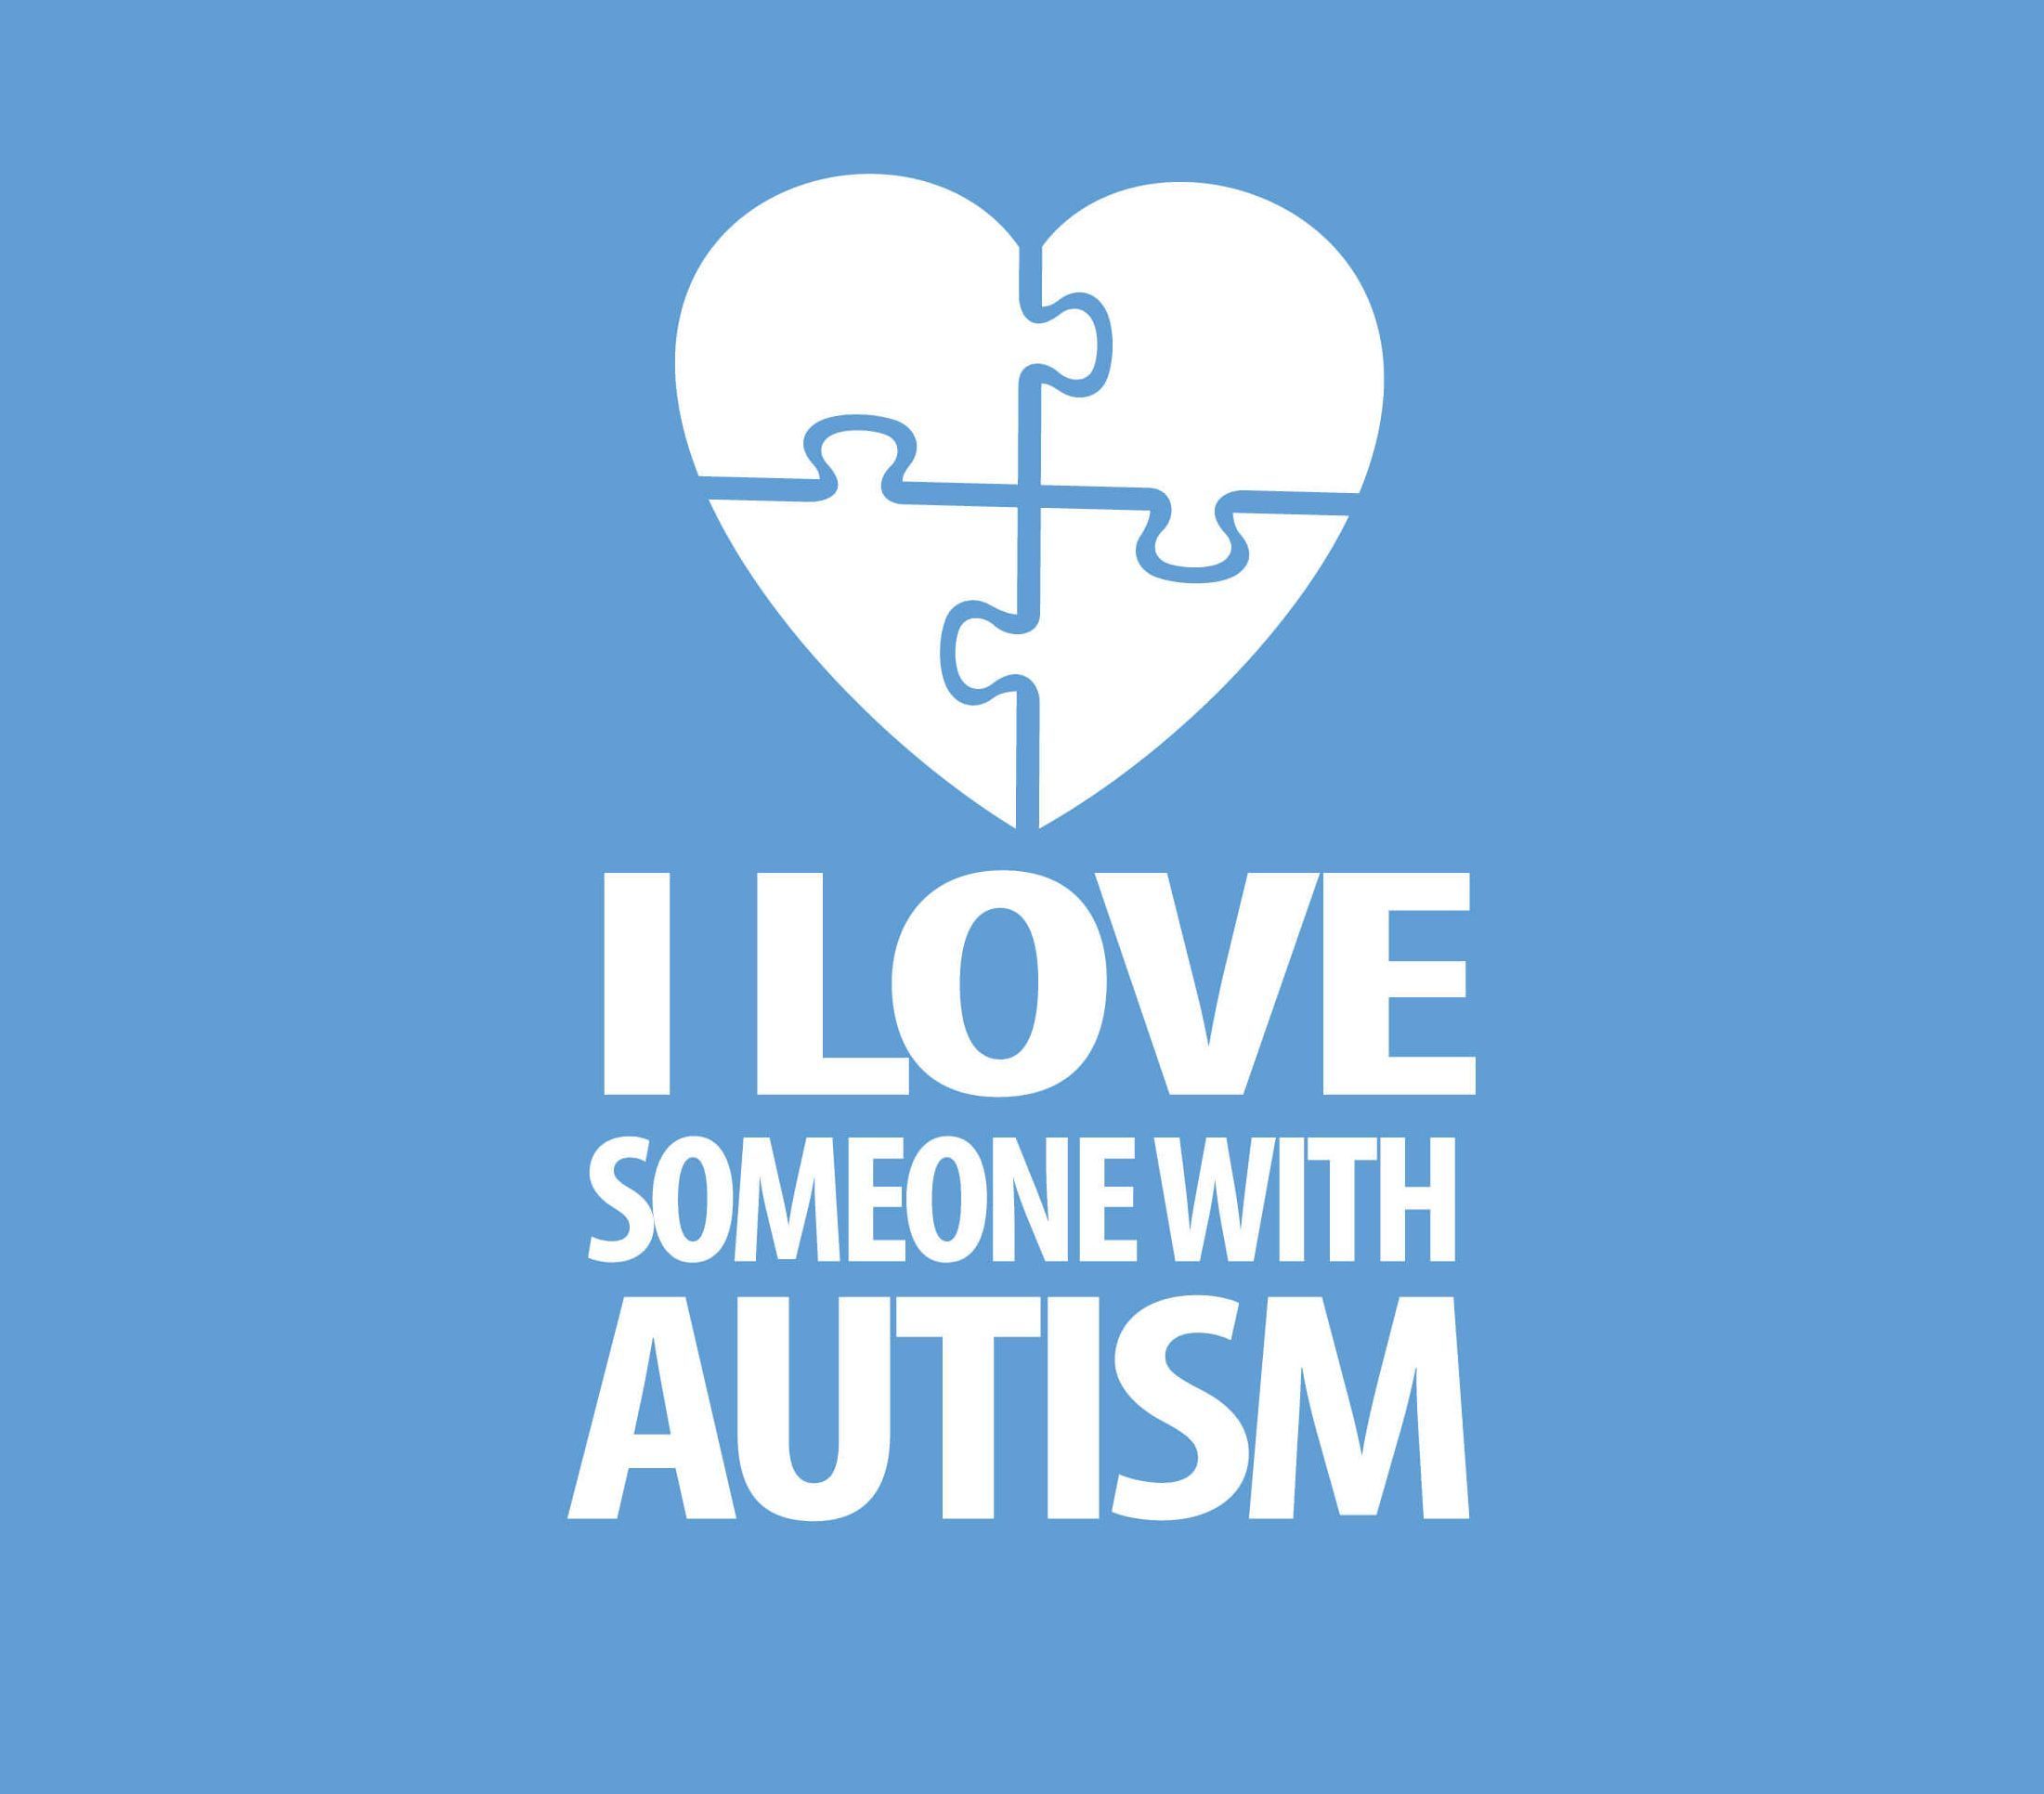 World Autism Day Quotes Image And Posters To Share